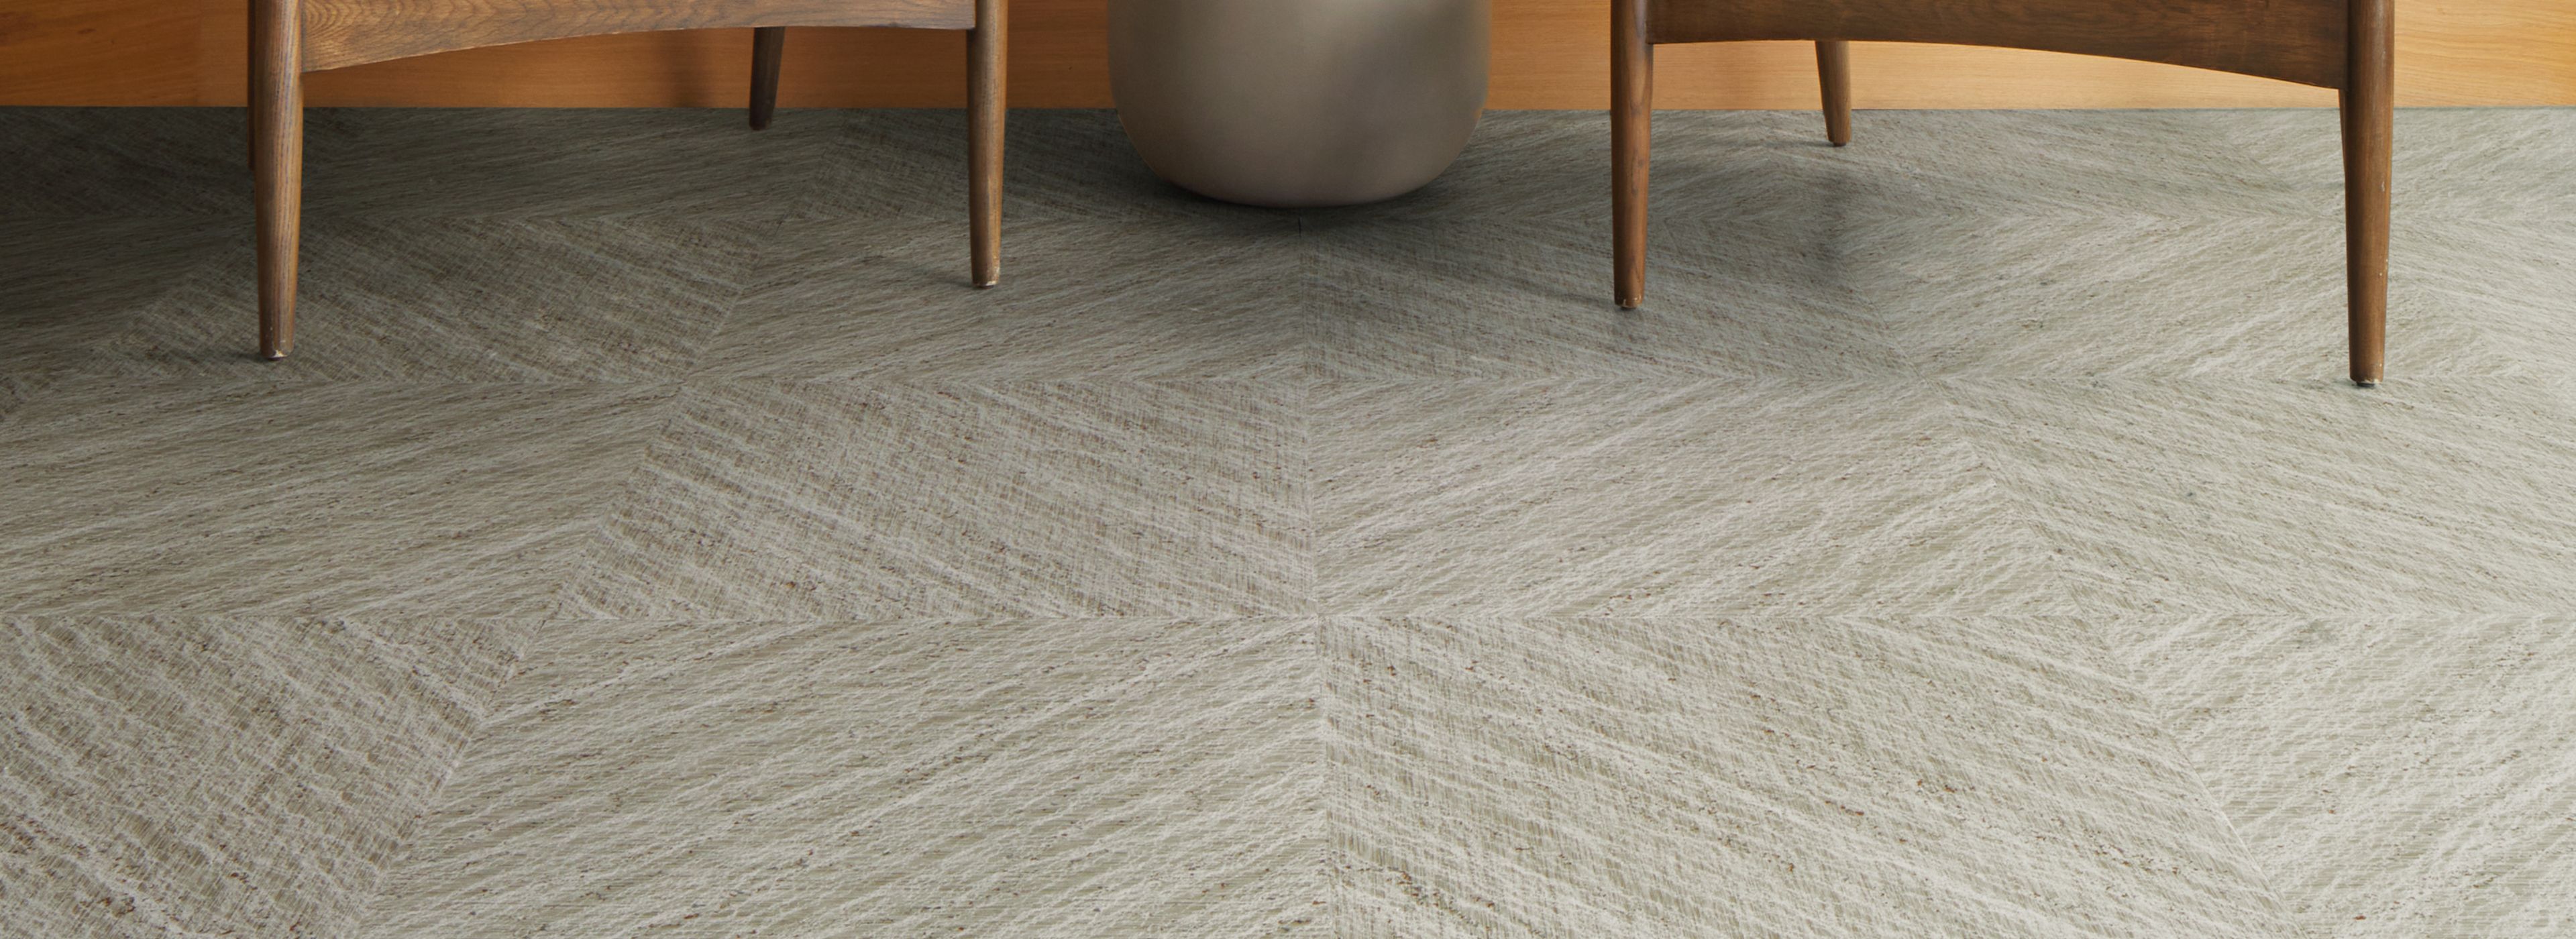 Interface Ridge LVT in Agate shown in a casual seating area afbeeldingnummer 1